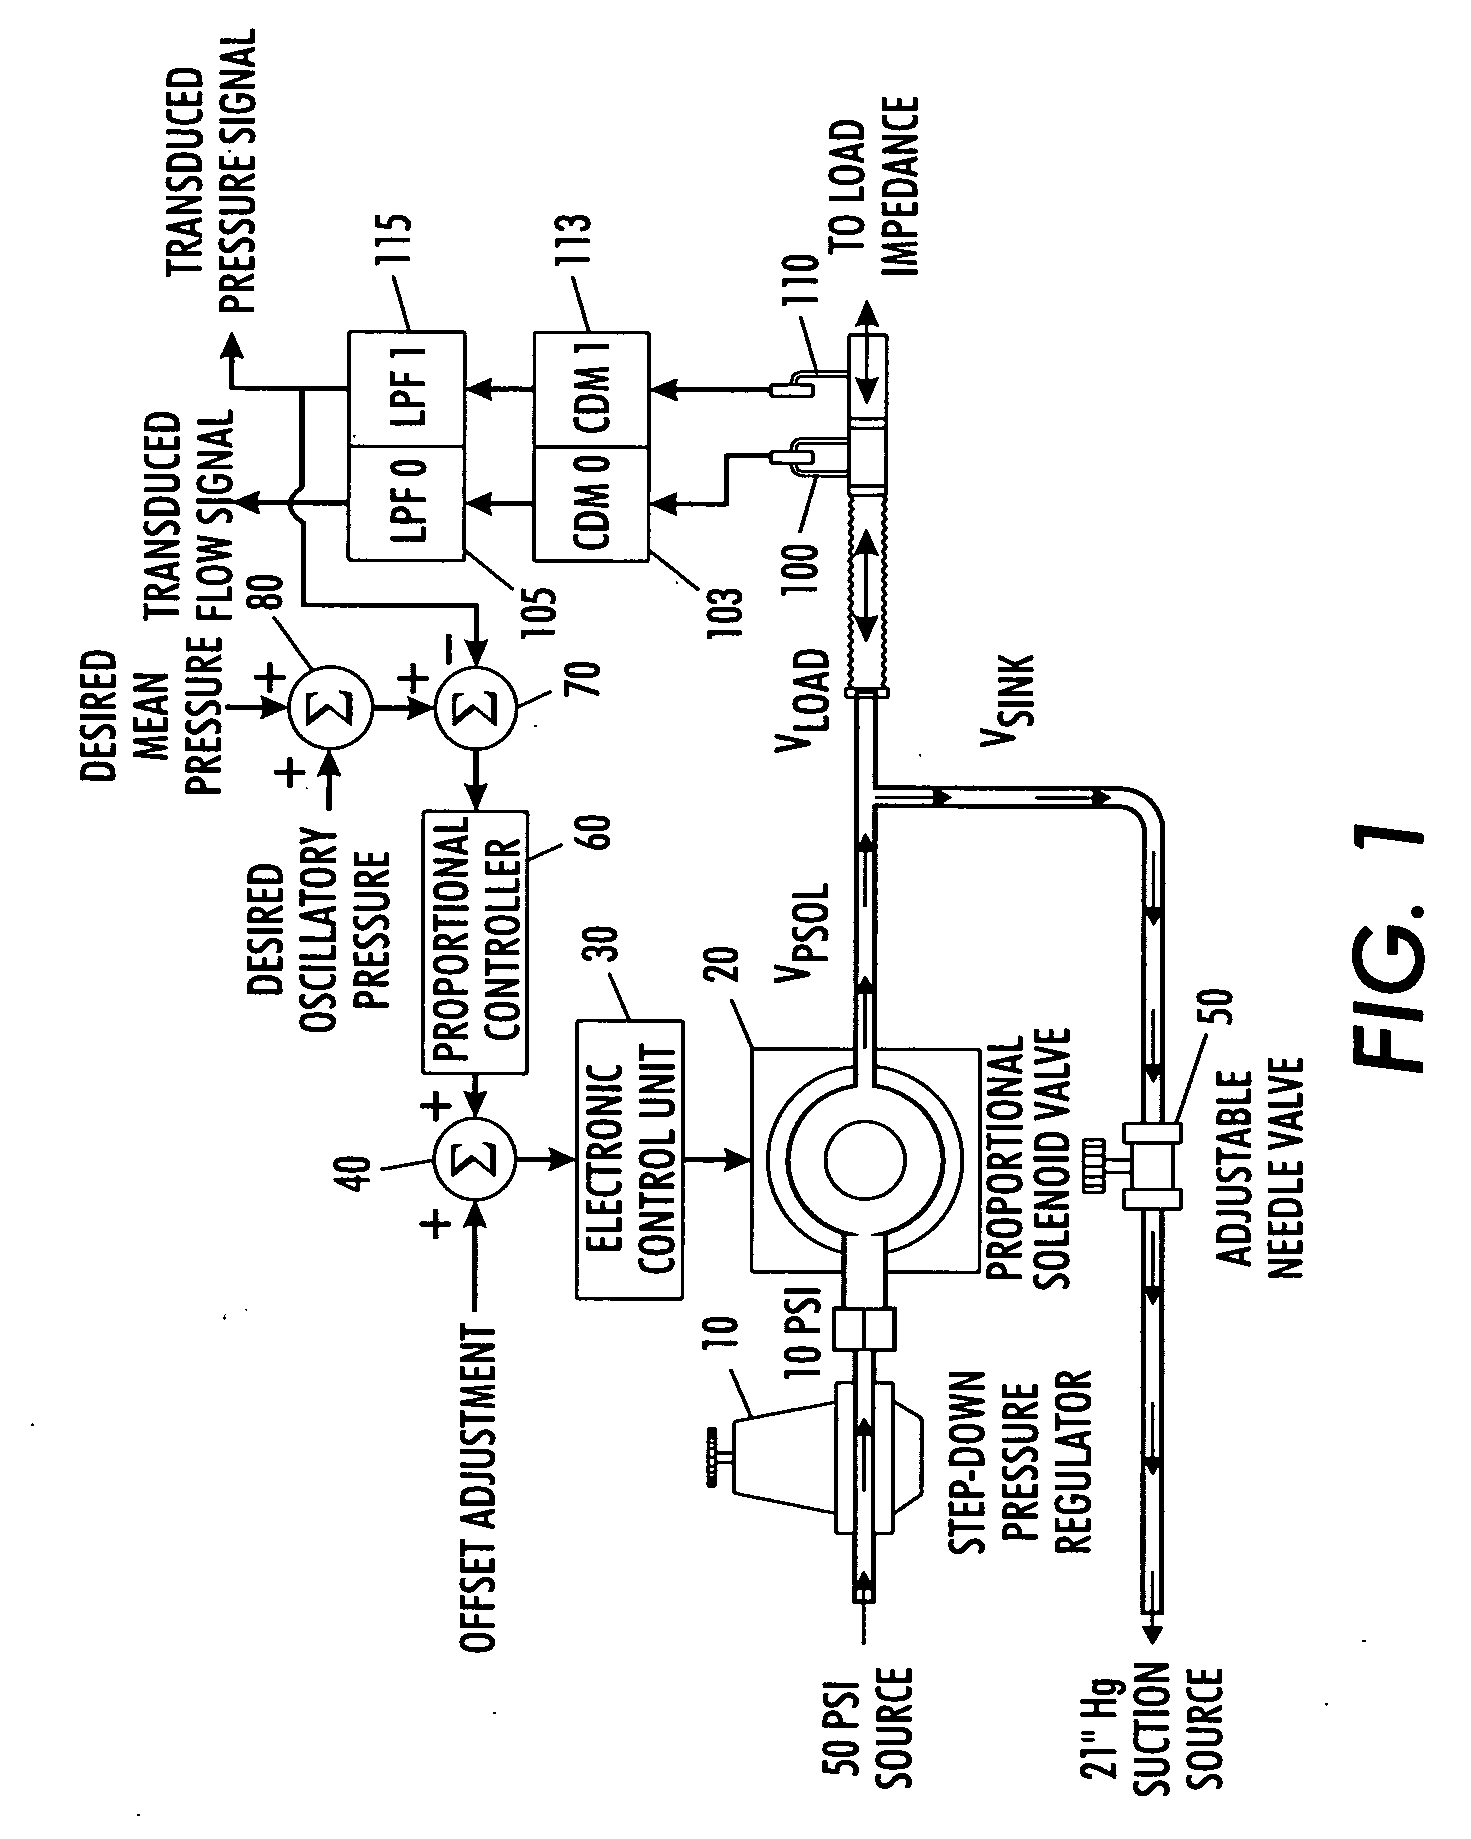 Servo-controlled pneumatic pressure oscillator for respiratory impedance measurements and high-frequency ventilation